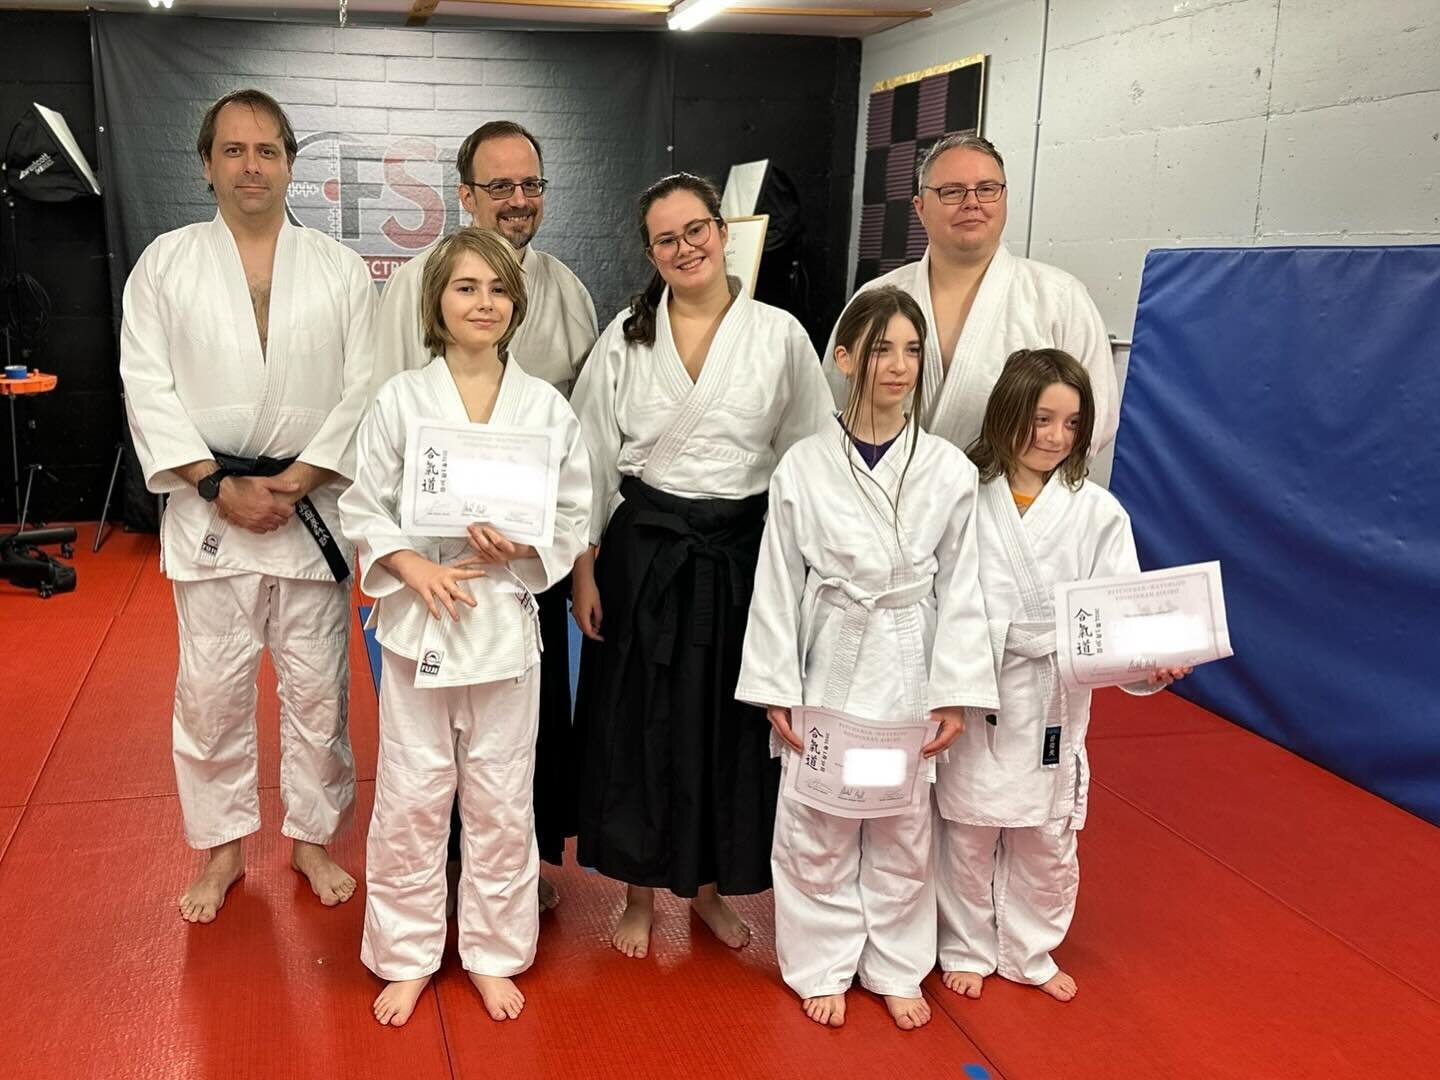 Congratulations to all the kids who passed their first test this weekend and earned a stripe! Your hard work, dedication and discipline is commendable! ⭐️